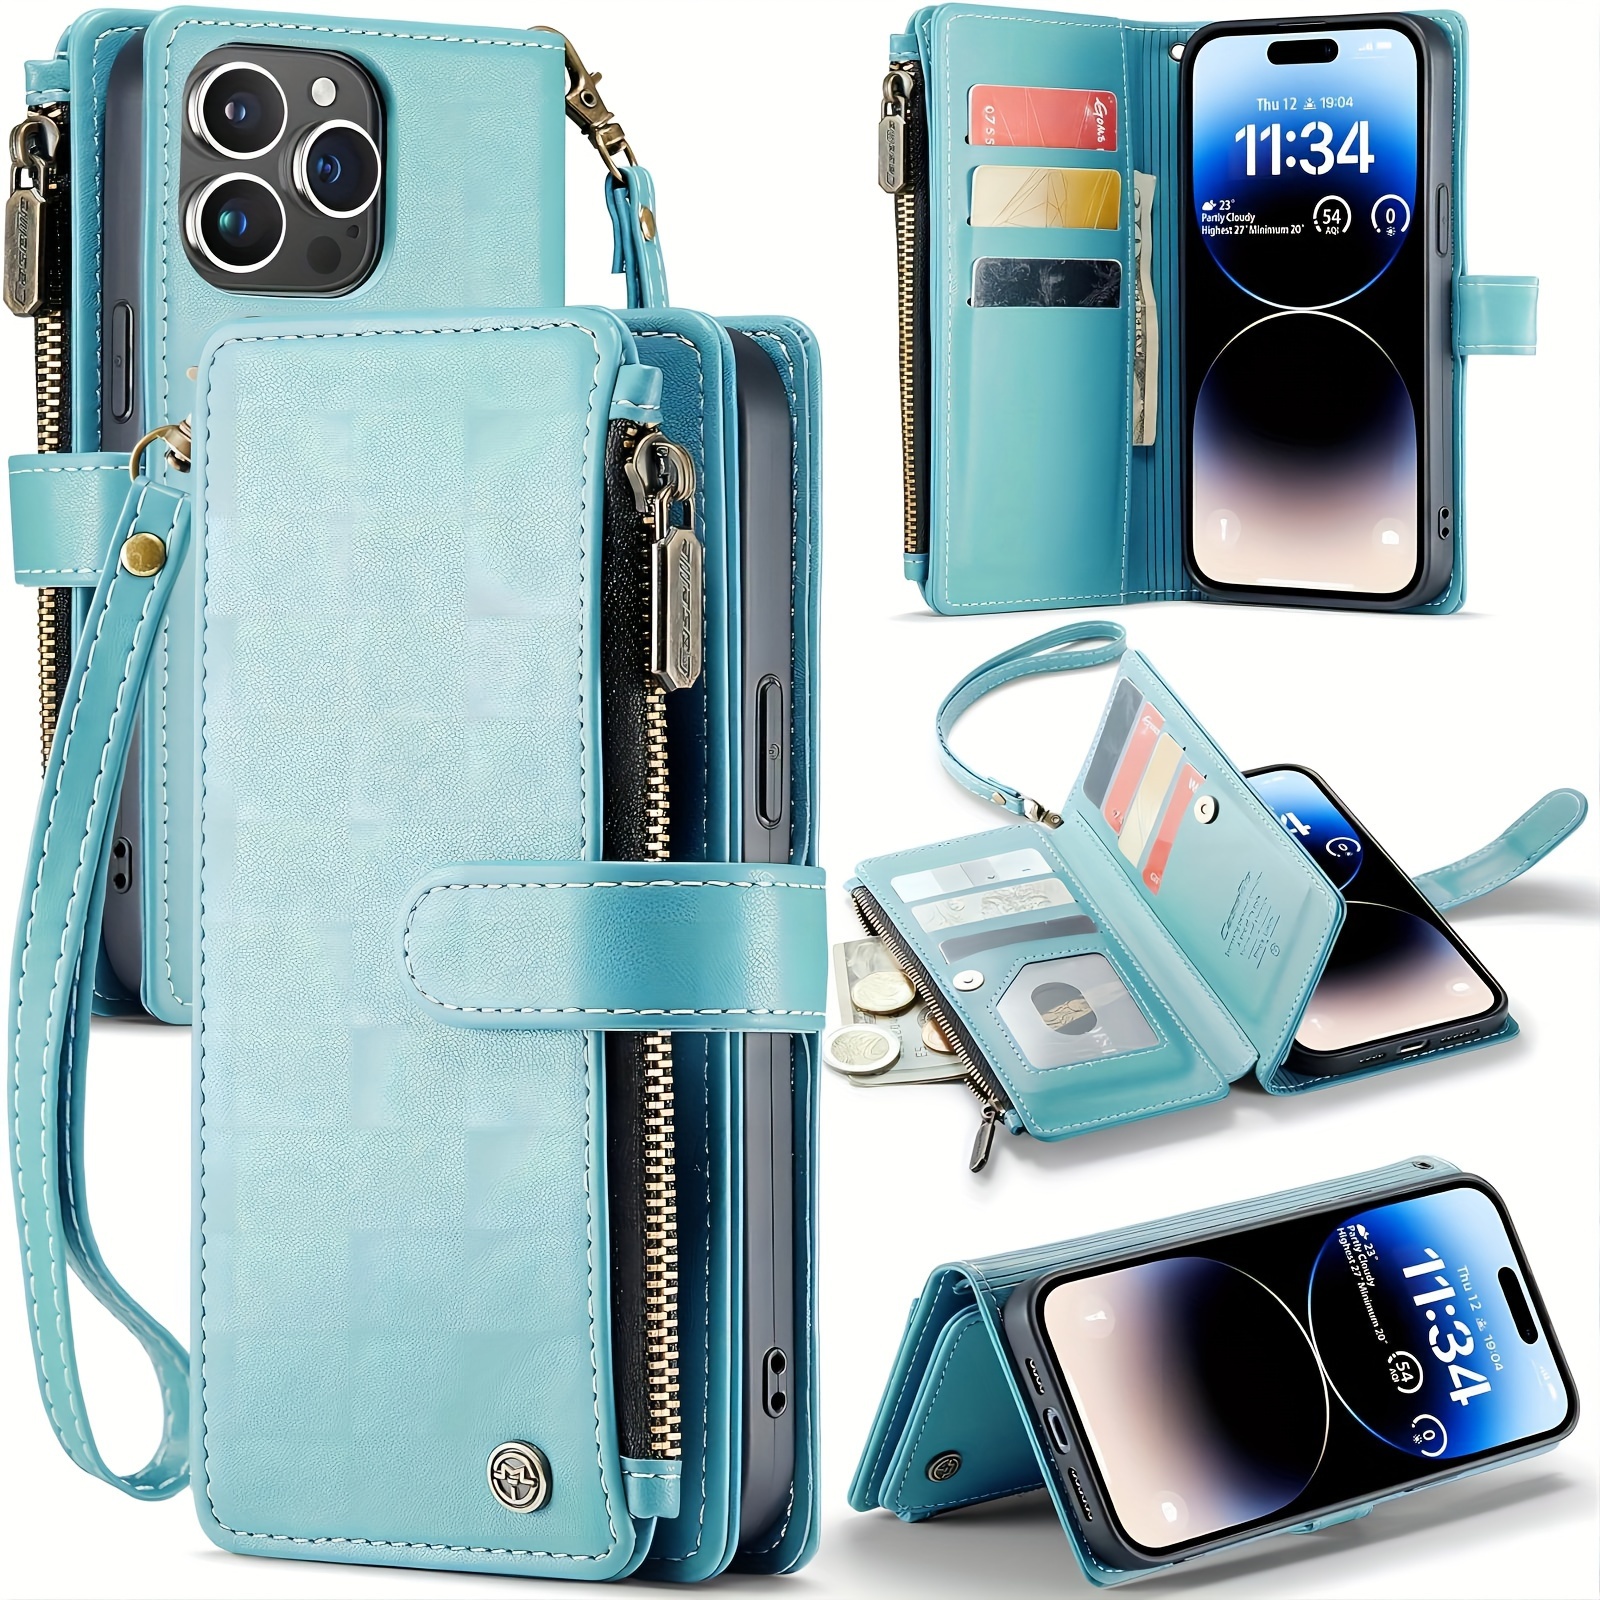 

Wallet Case For Iphone 15/14/13/12 Pro Max With Rfid Blocking, Phone Case With Card Holder For Women Men, Durable Kickstand Zipper Shockproof